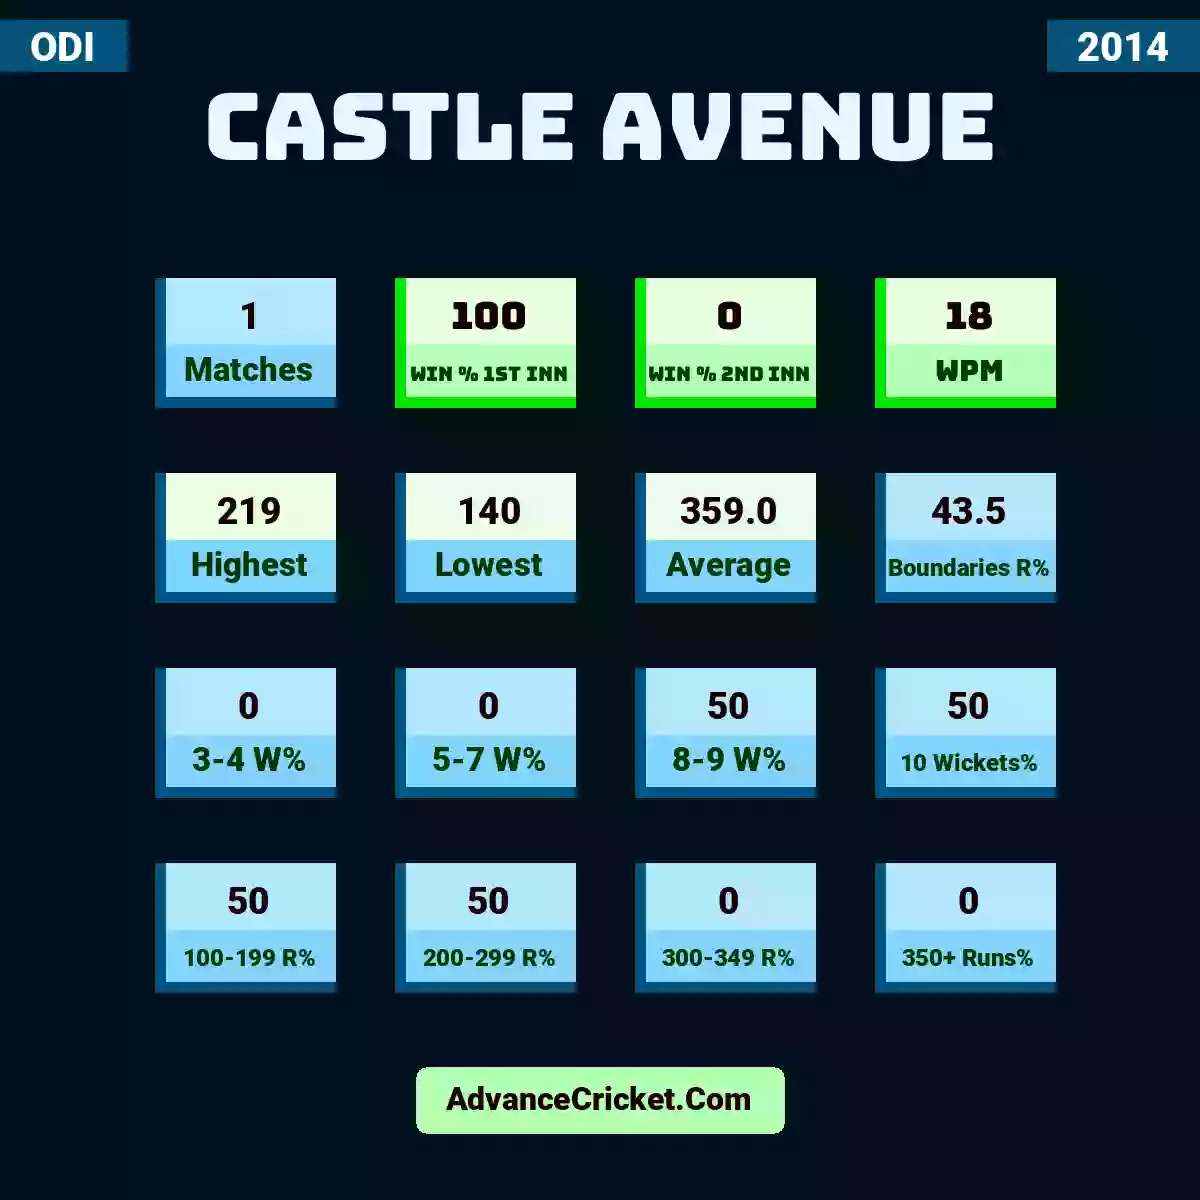 Image showing Castle Avenue with Matches: 1, Win % 1st Inn: 100, Win % 2nd Inn: 0, WPM: 18, Highest: 219, Lowest: 140, Average: 359.0, Boundaries R%: 43.5, 3-4 W%: 0, 5-7 W%: 0, 8-9 W%: 50, 10 Wickets%: 50, 100-199 R%: 50, 200-299 R%: 50, 300-349 R%: 0, 350+ Runs%: 0.